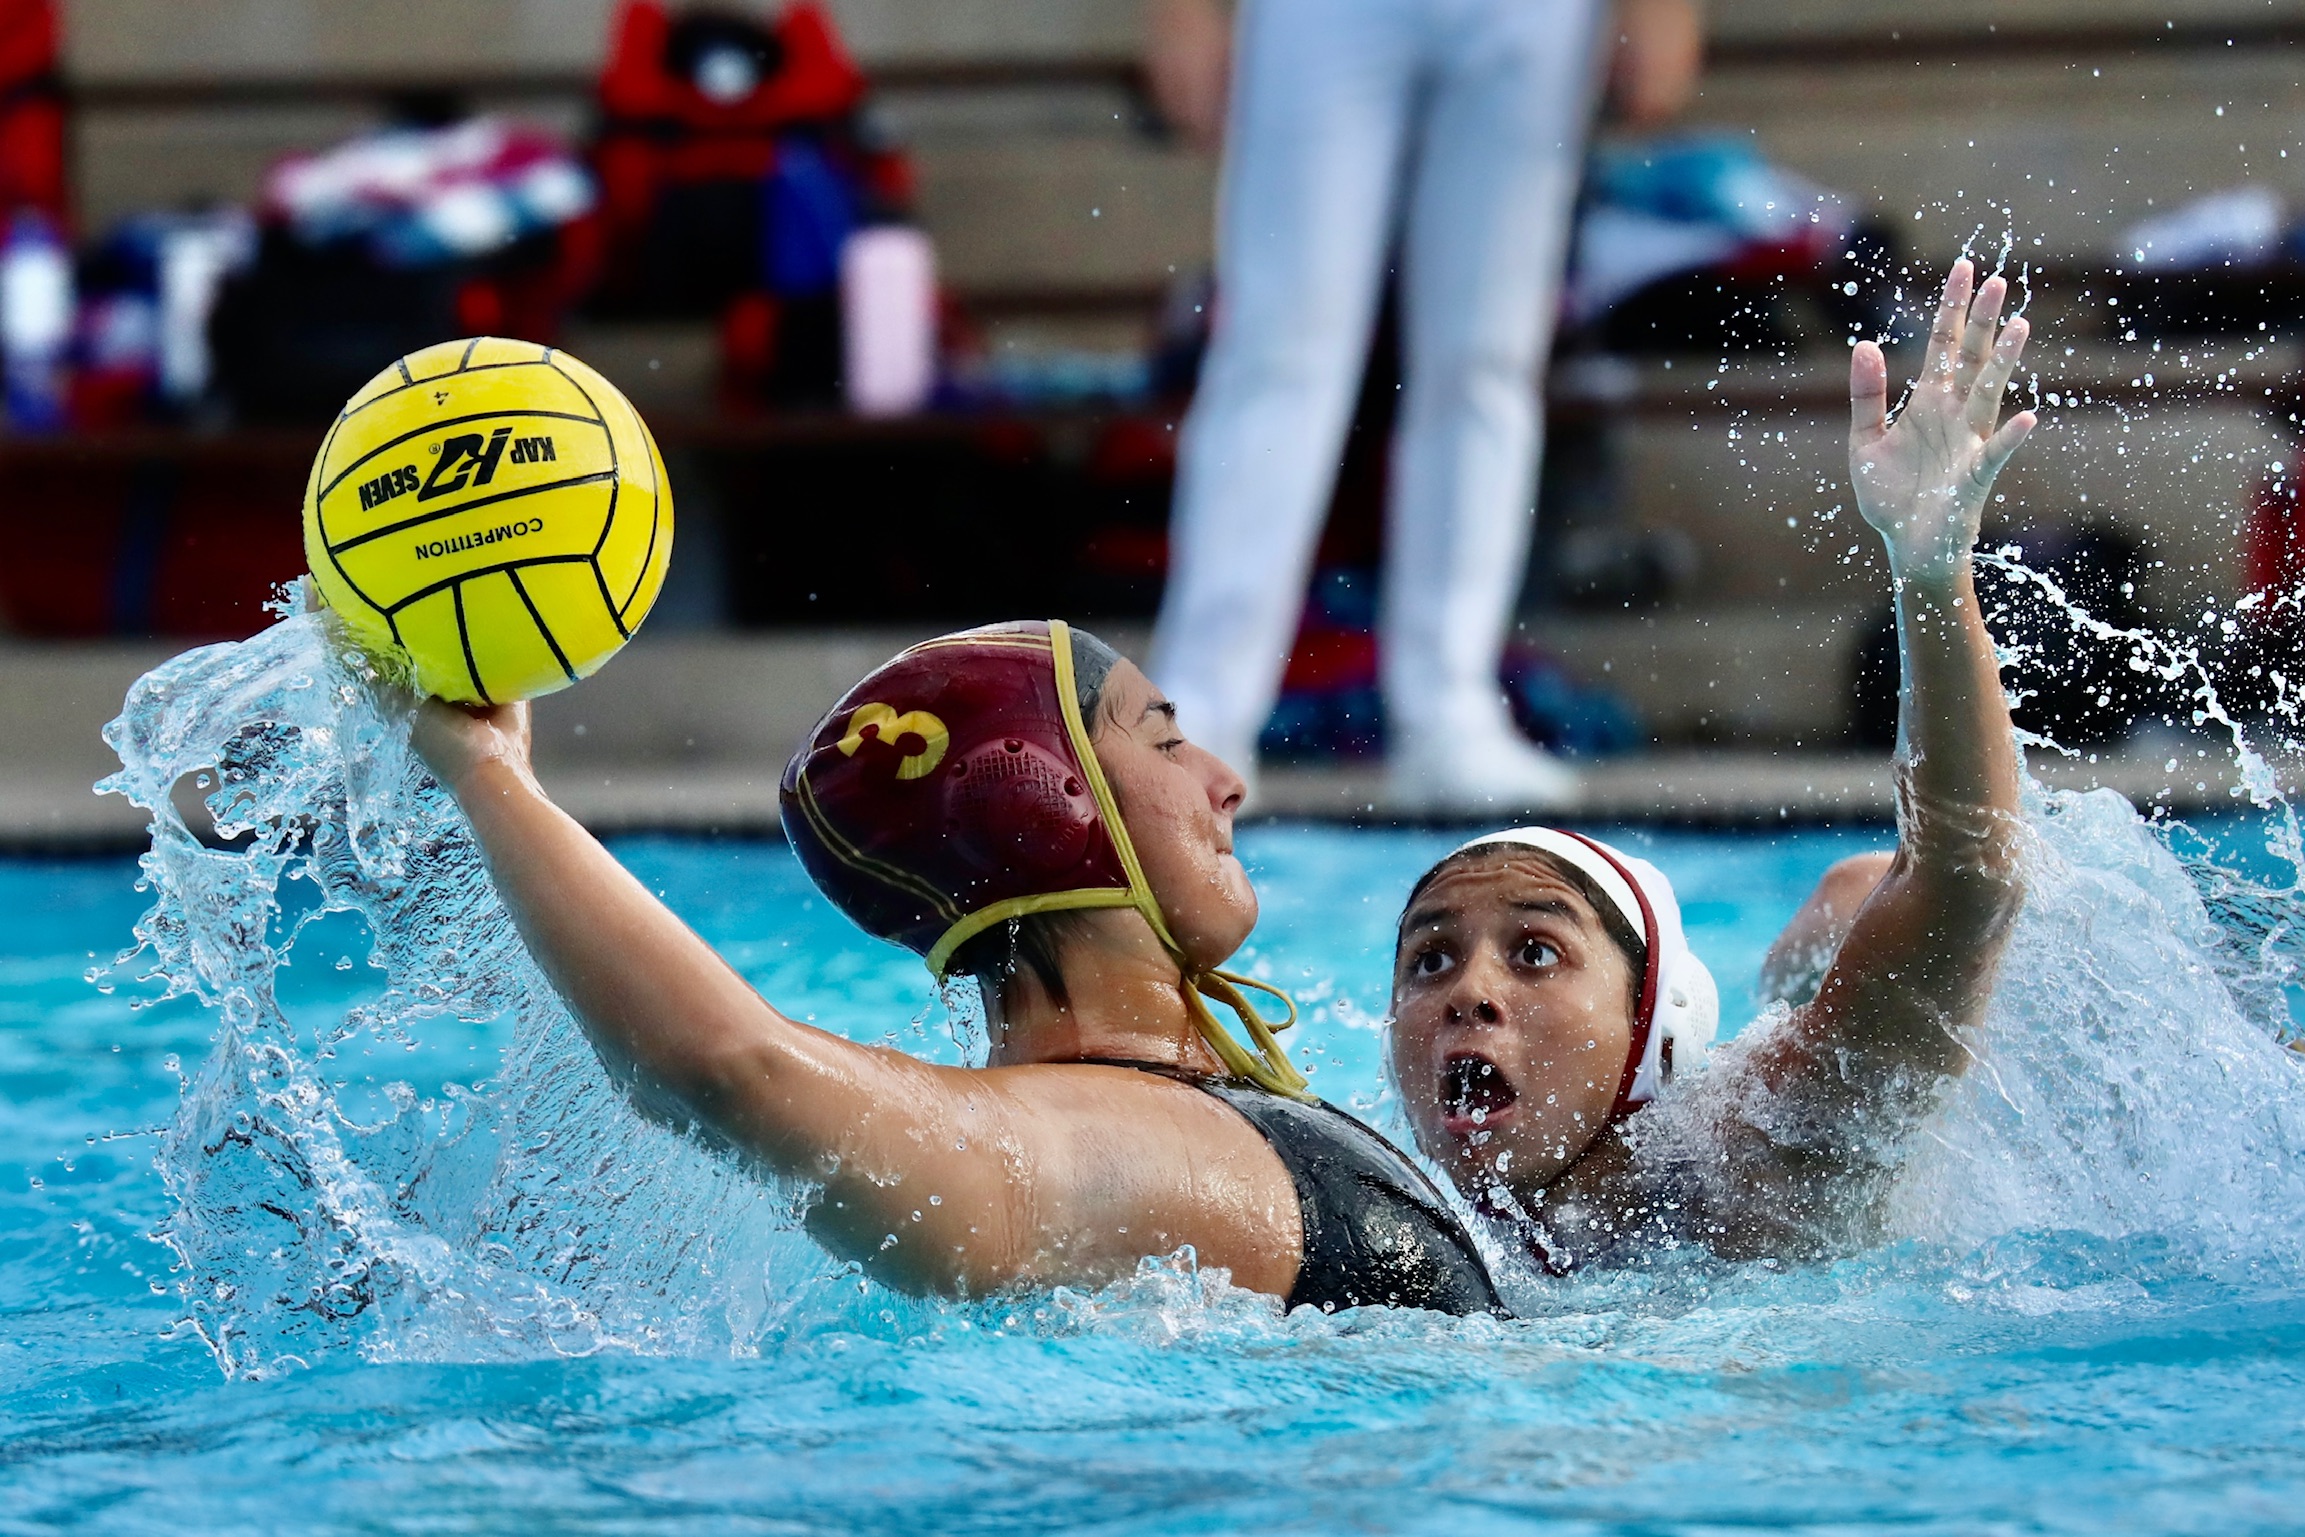 Lilian Tahmasian led PCC with five goals in its win on Wednesday (past game photo by Michael Watkins).